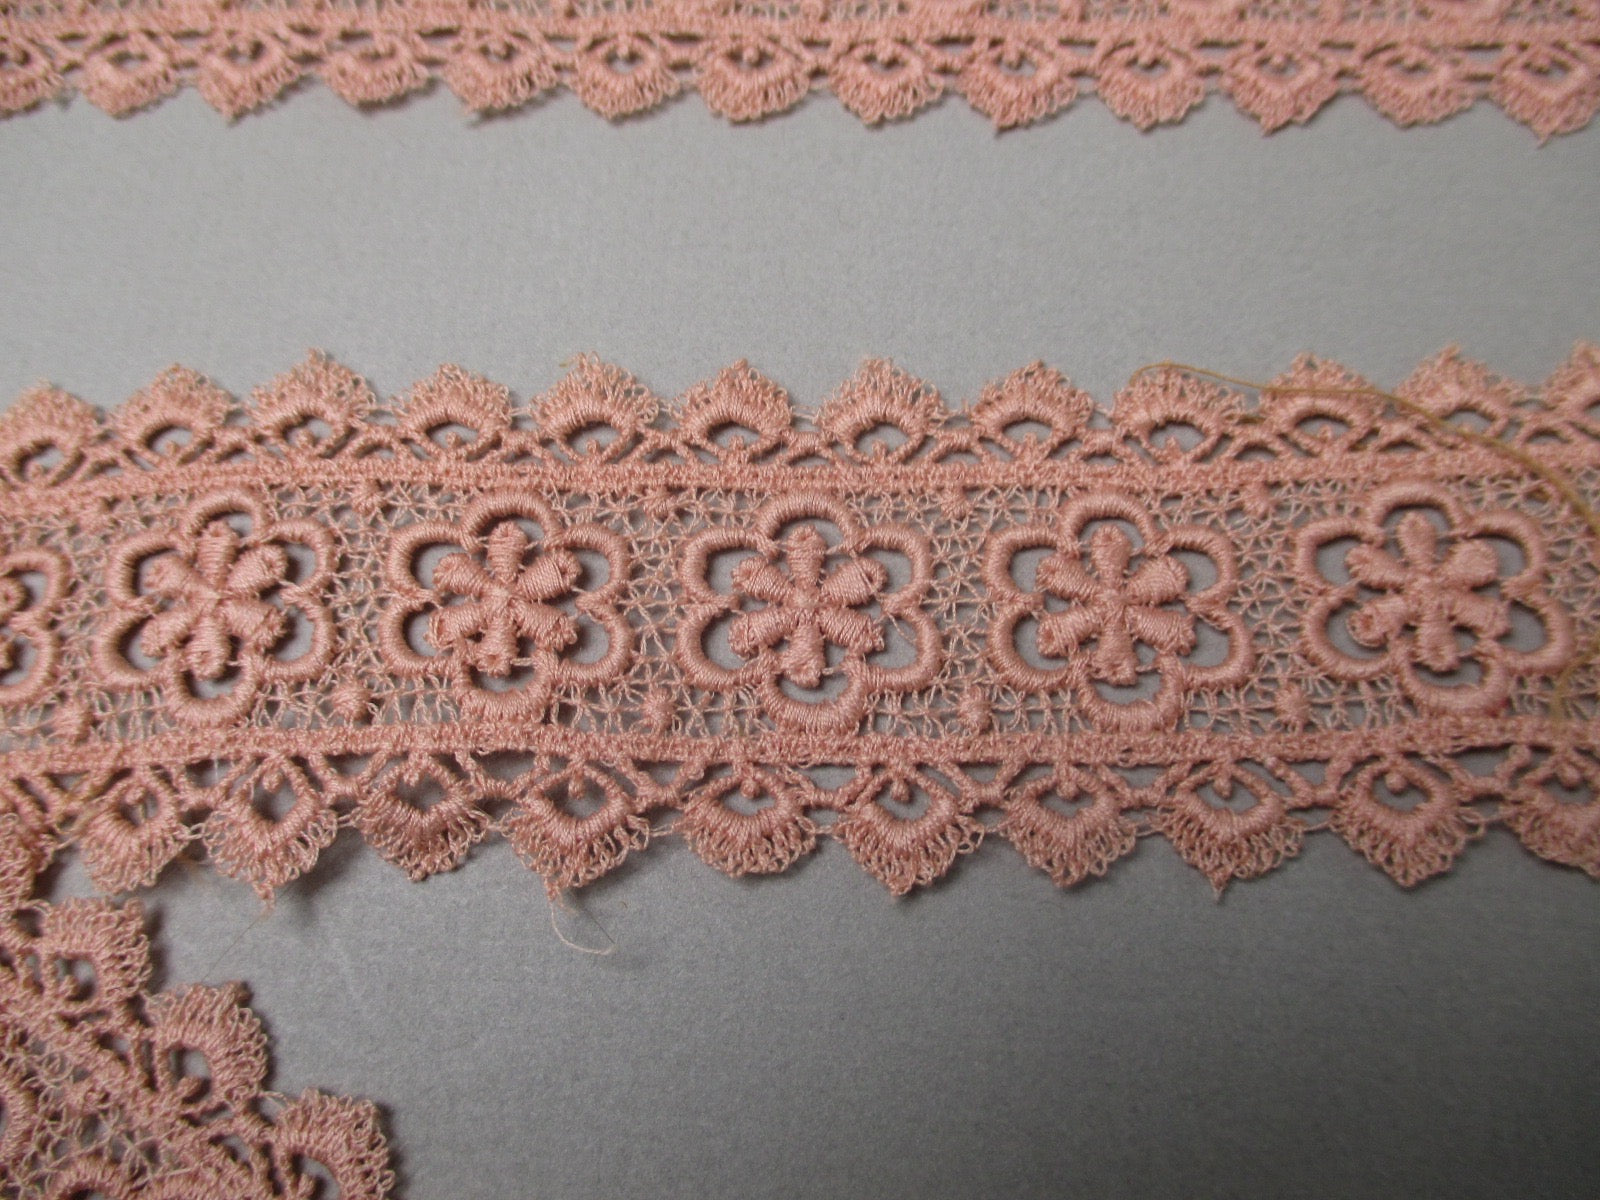 Antique lace galloon style